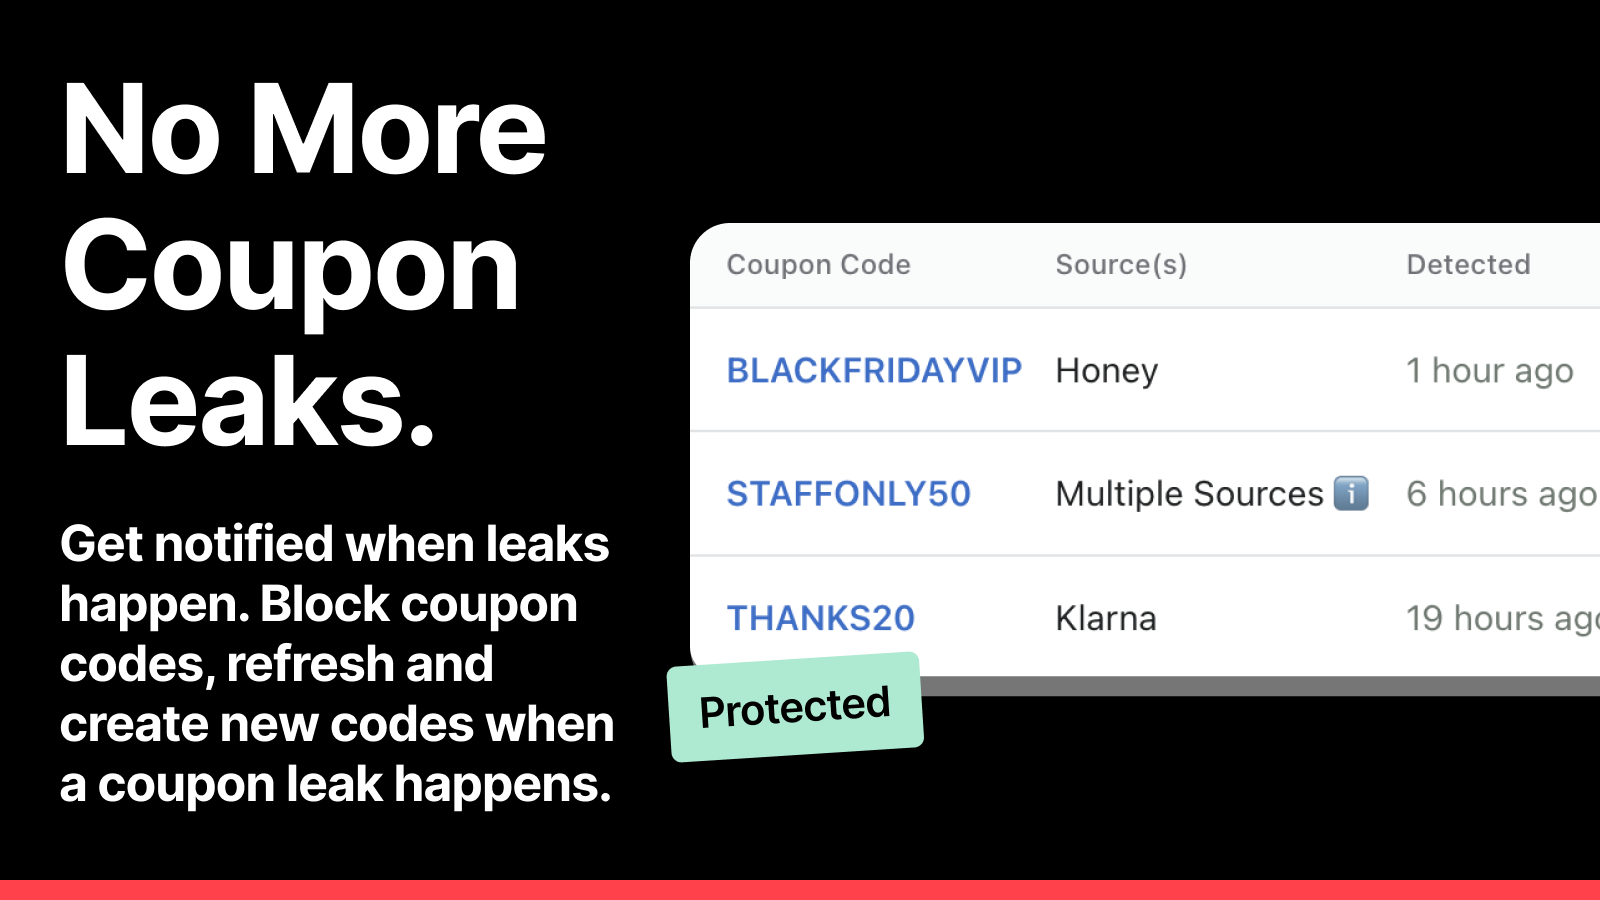 No More Coupon Leaks.